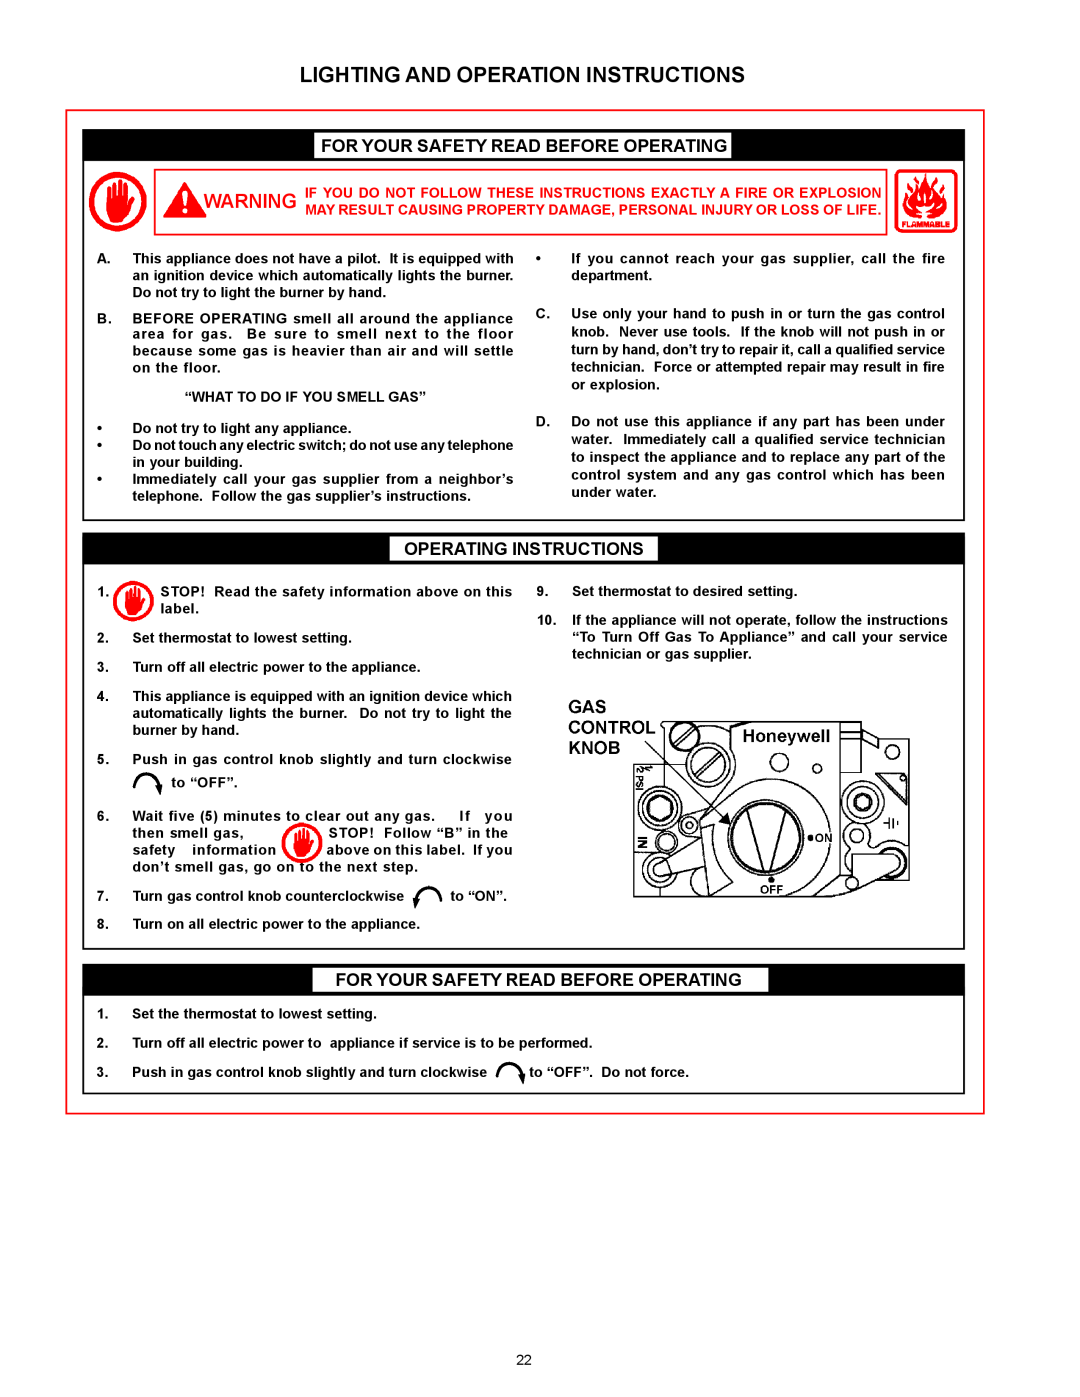 American Water Heater BCG3-85T390-6NOX warranty Lighting And Operation Instructions, For Your Safety Read Before Operating 